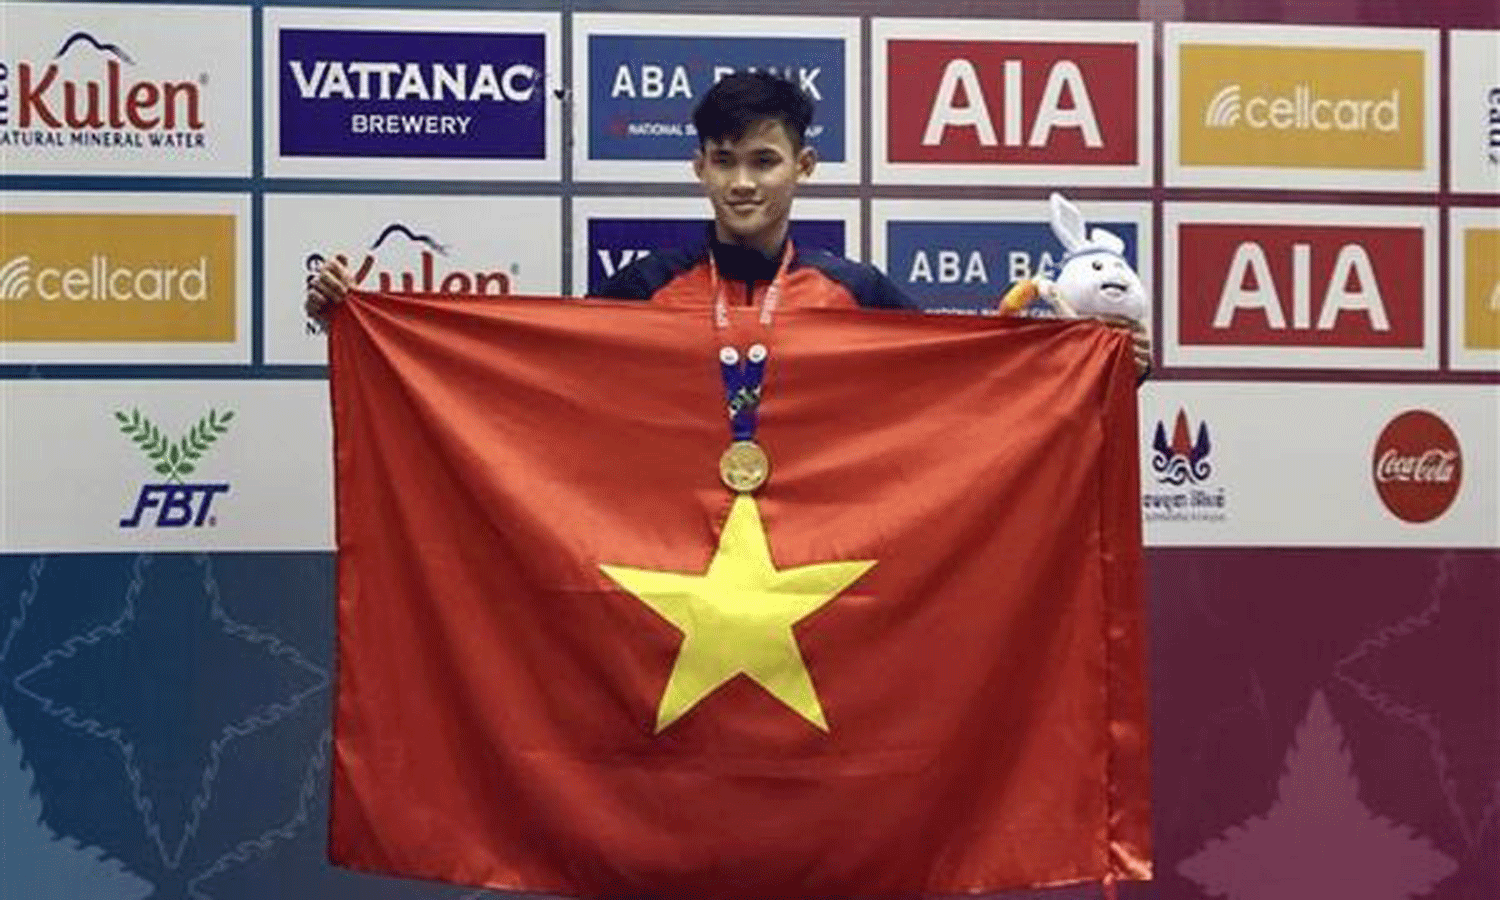 Swimmer Pham Thanh Bao sets a new SEA Games record in the men’s 200m breaststroke with 2 minutes 11 seconds and 45 (Photo: VNA).